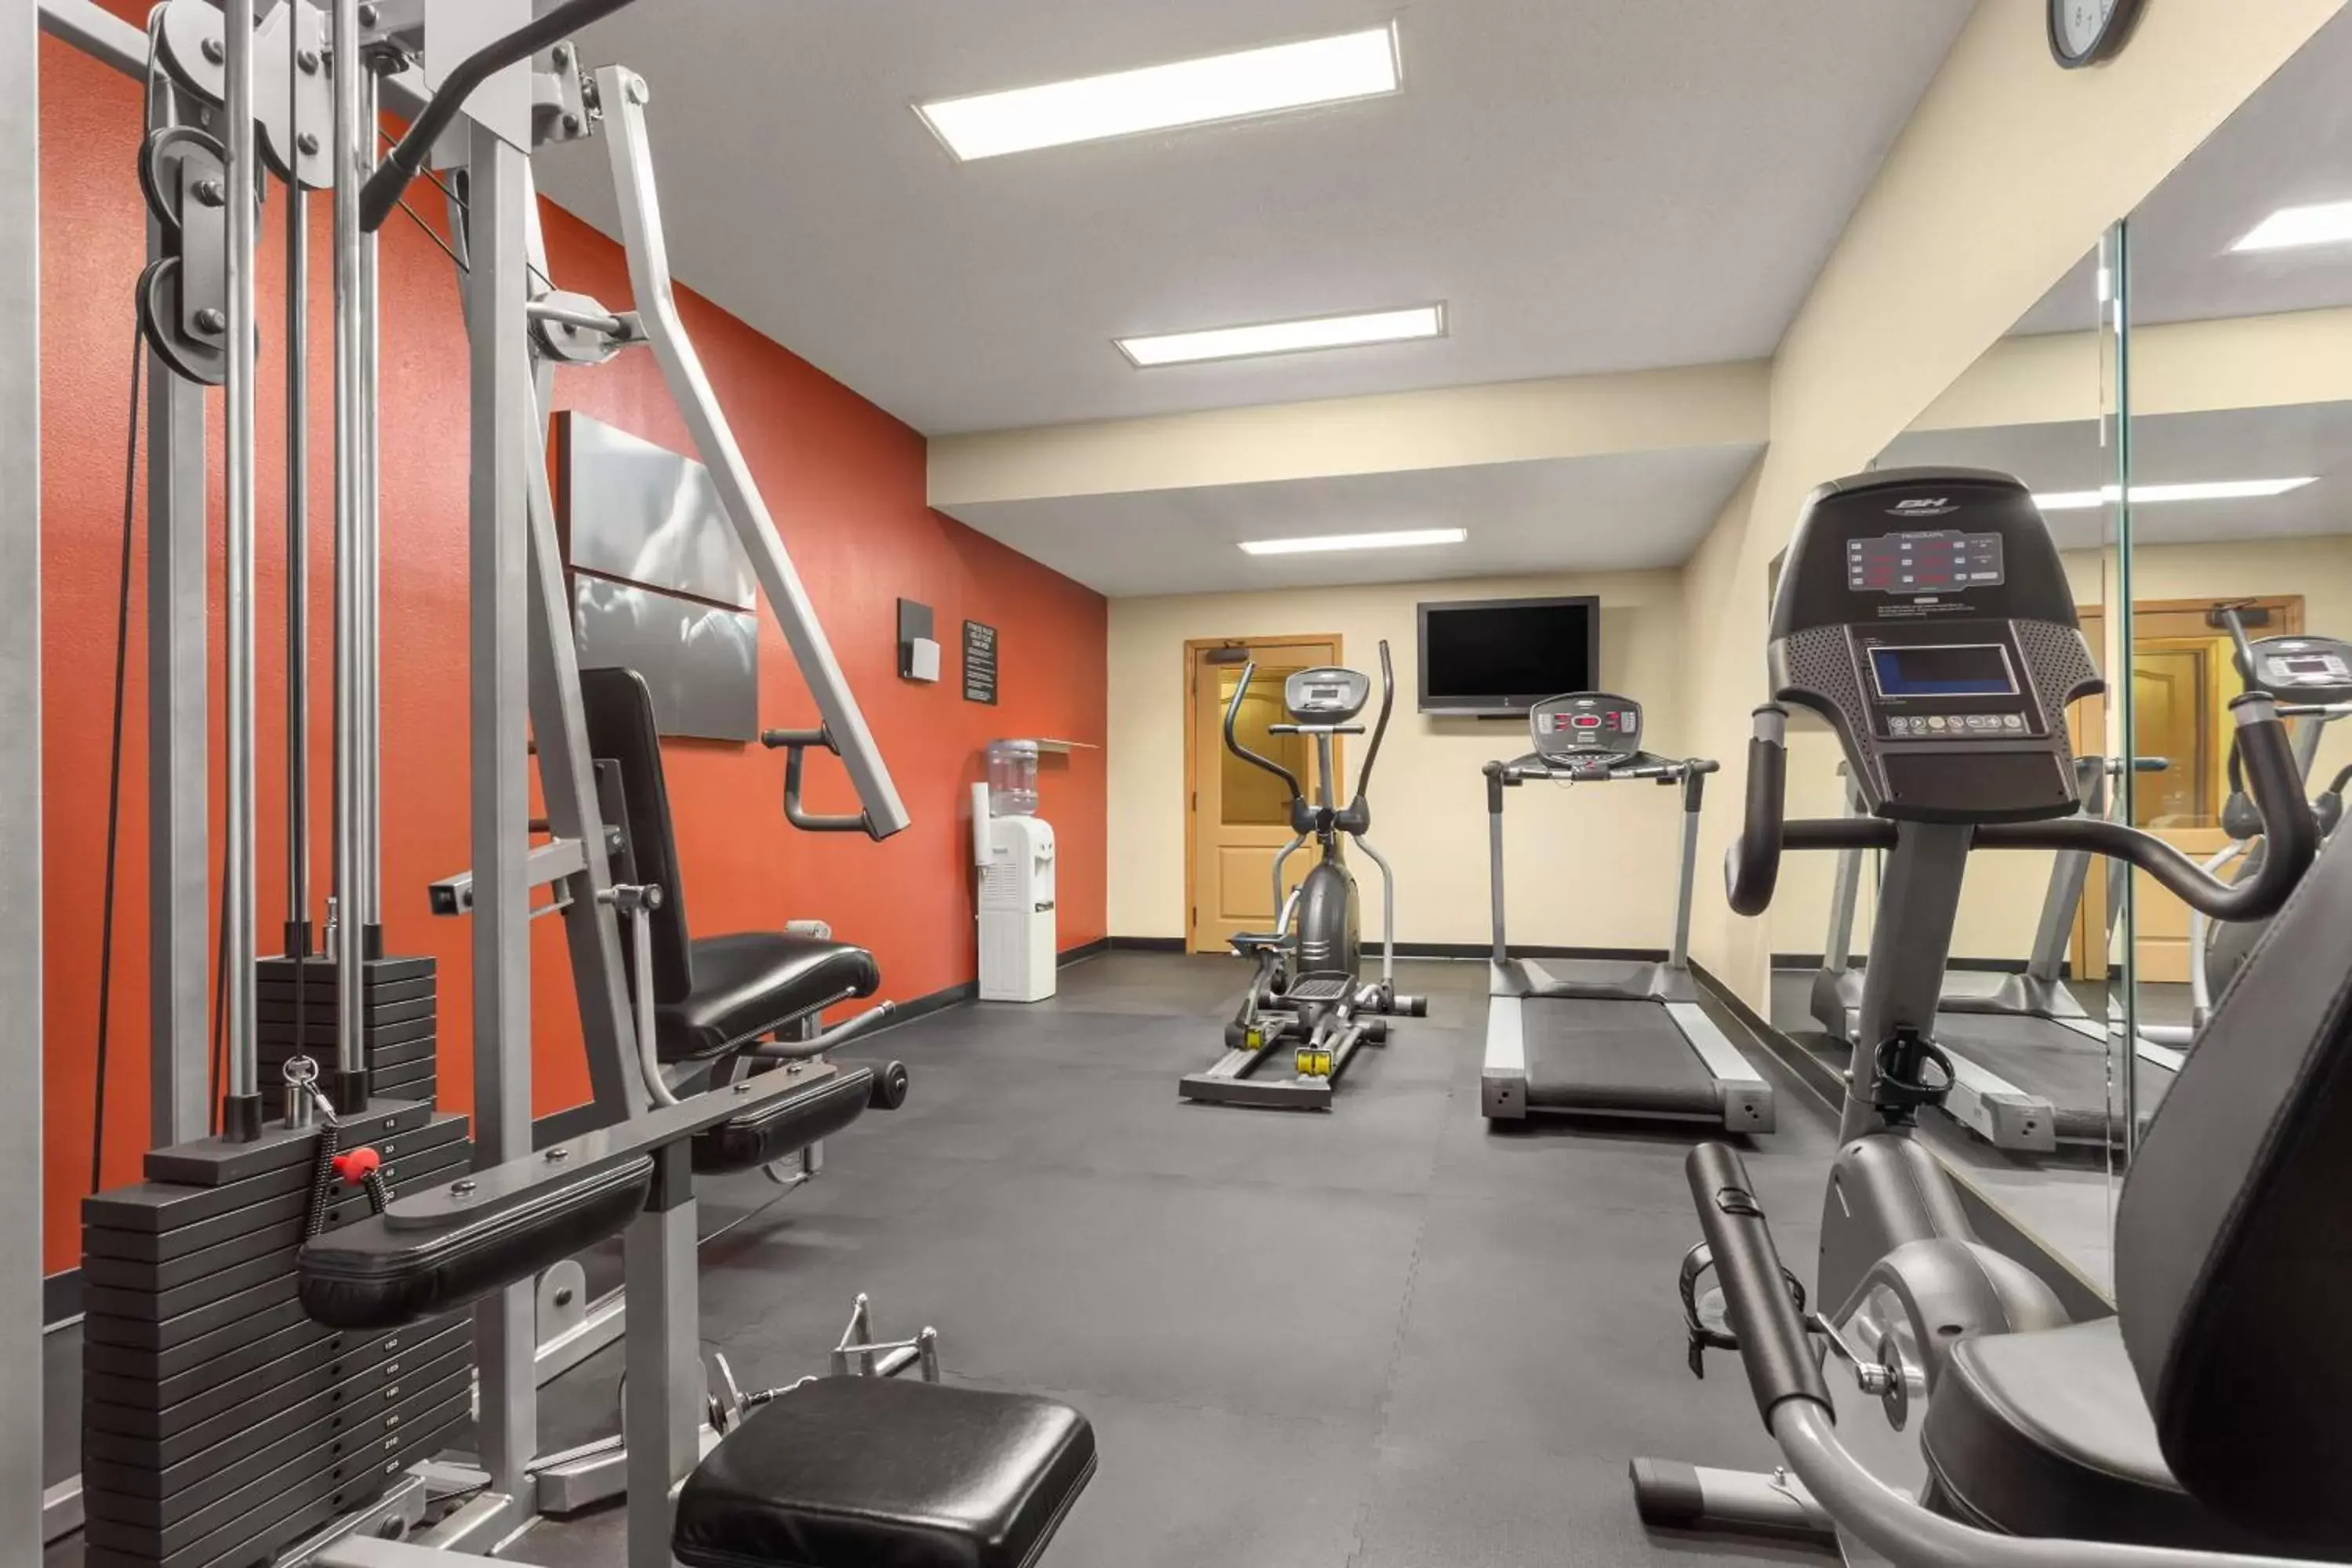 Activities, Fitness Center/Facilities in Country Inn & Suites by Radisson, Tuscaloosa, AL